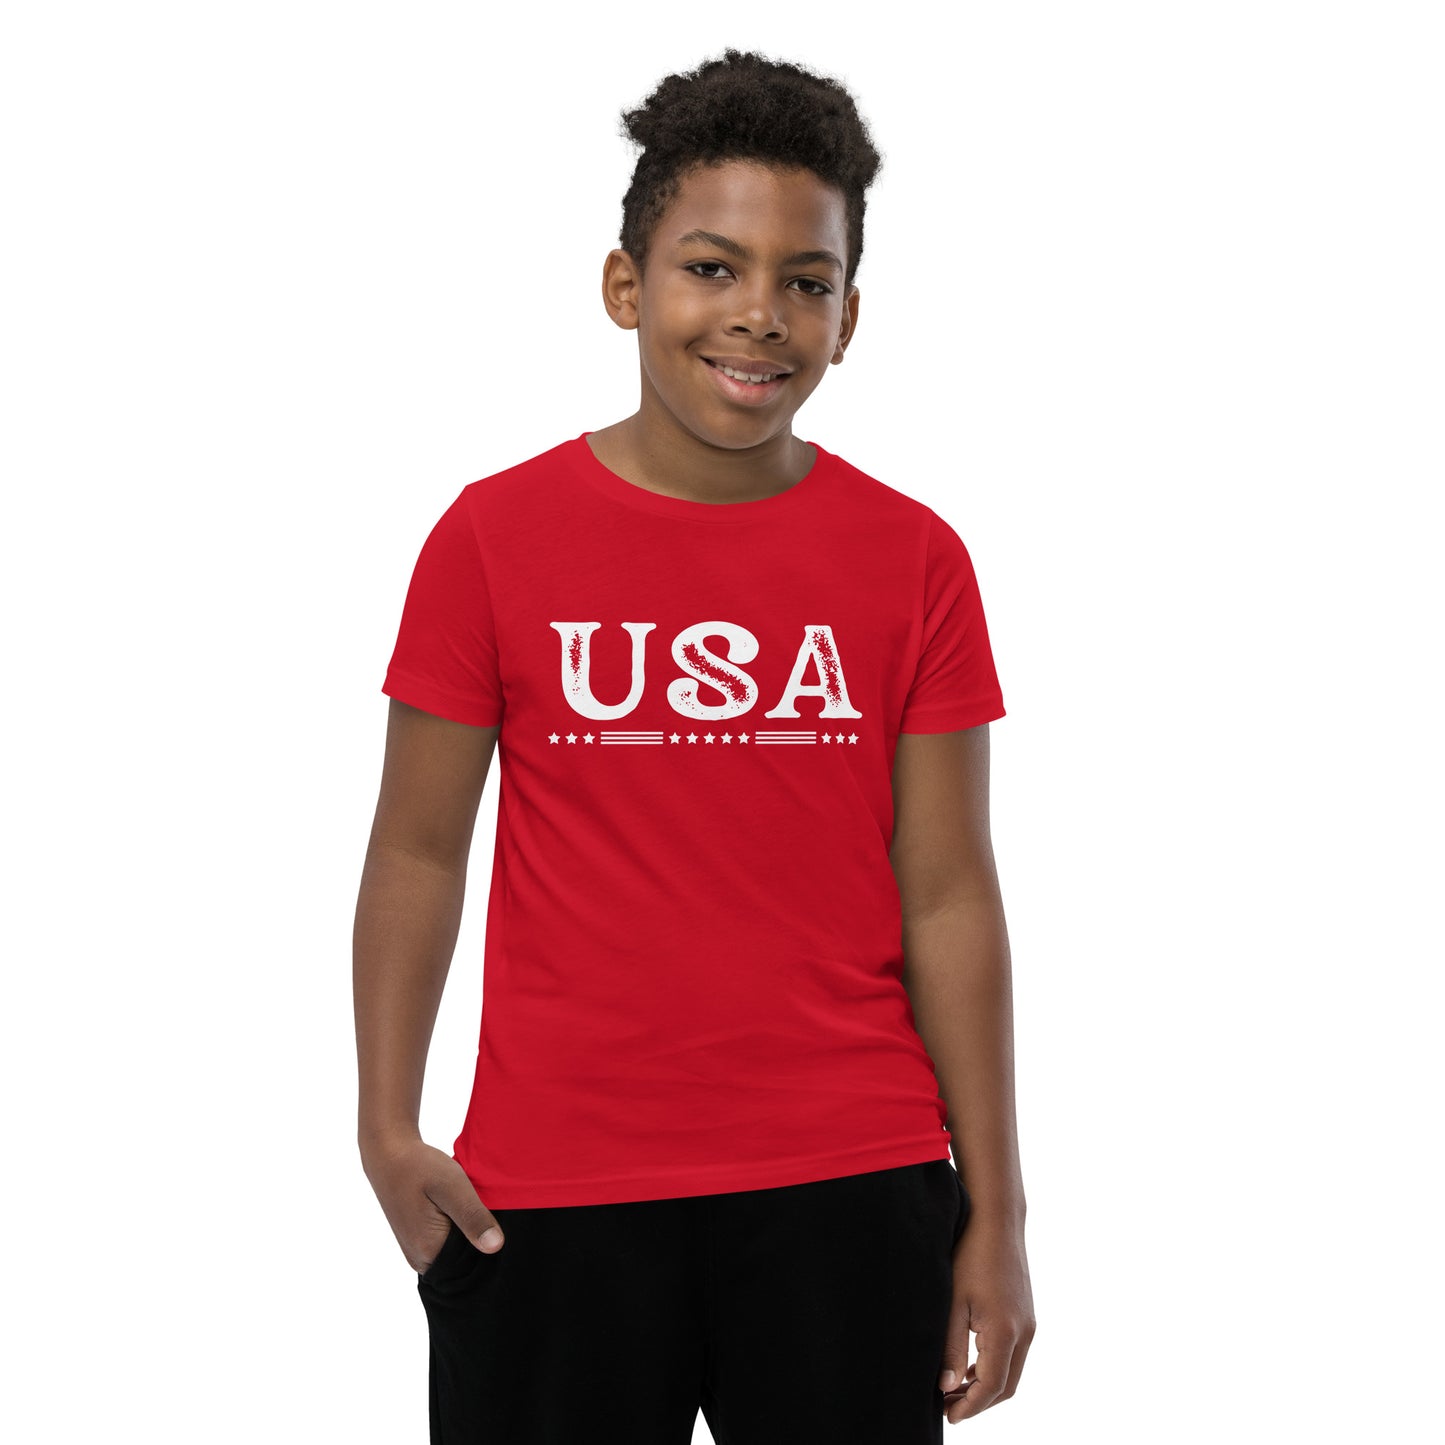 USA Youth 4th of July T-shirt